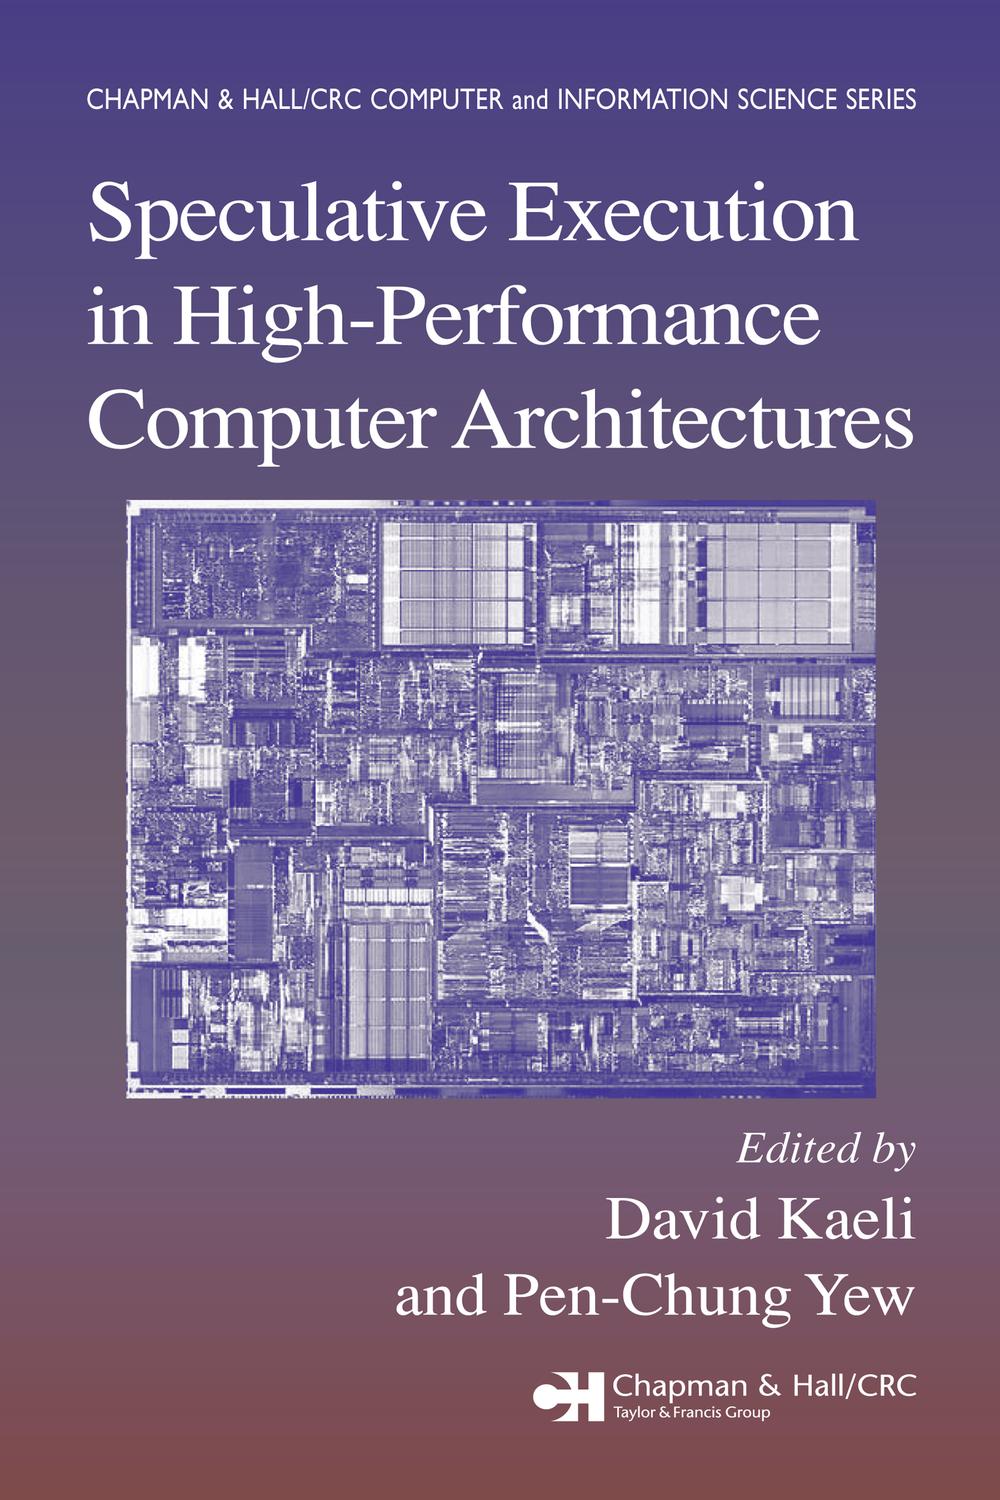 Speculative Execution in High Performance Computer Architectures - David Kaeli, Pen-Chung Yew